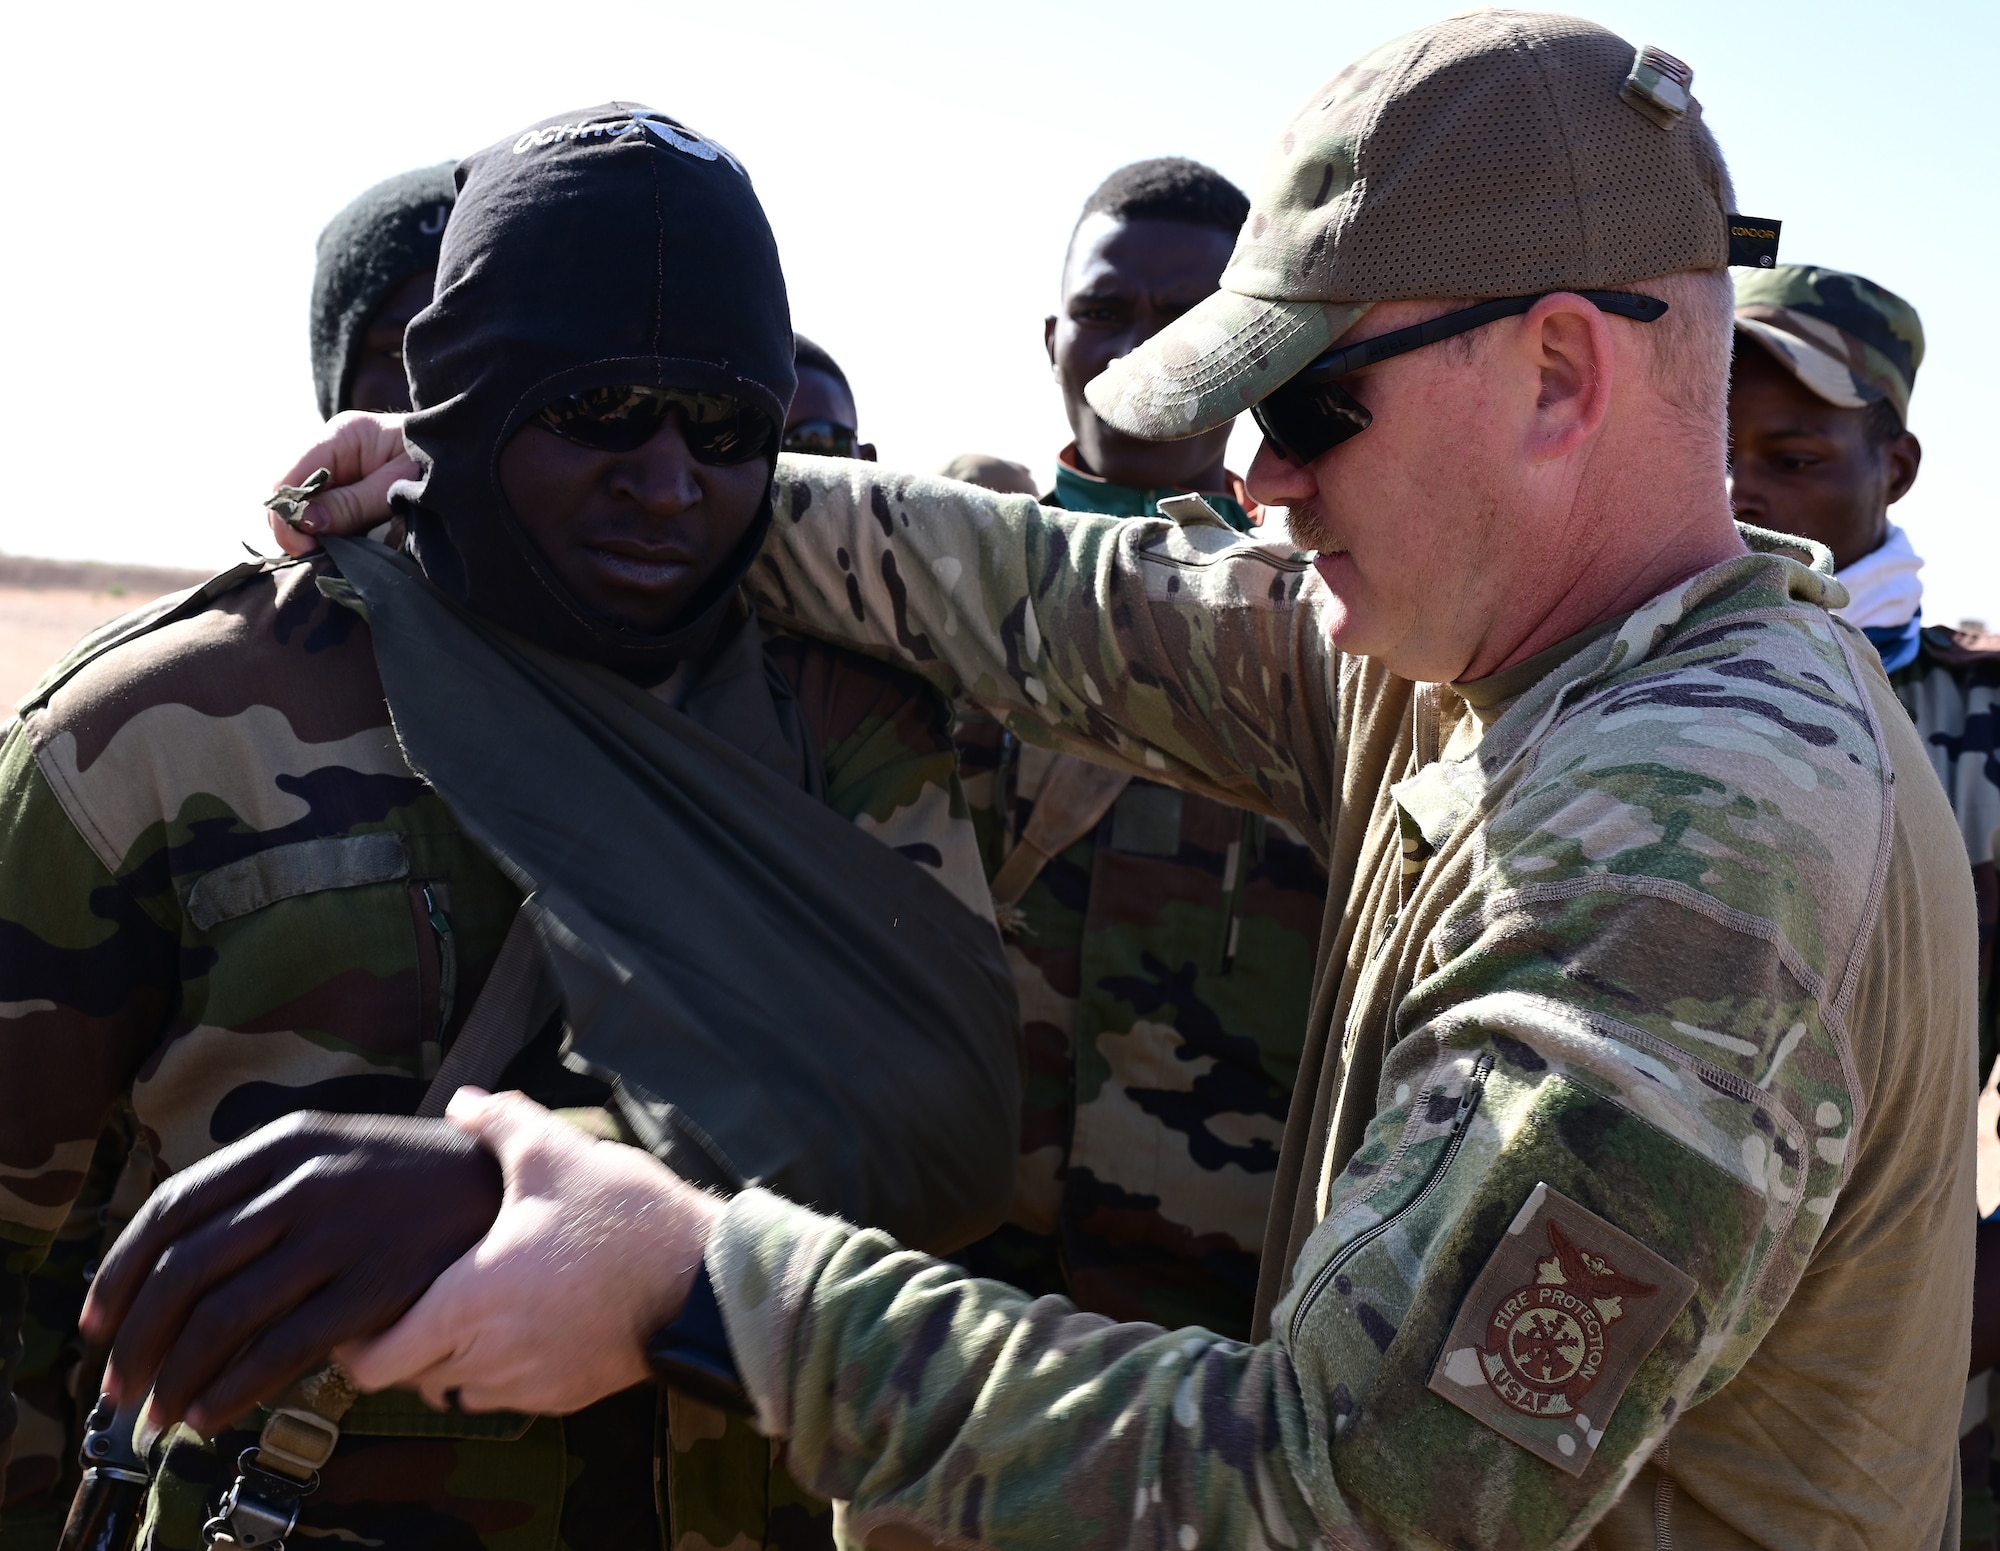 U.S. Air Force Tech. Sgt. Sean Douglas, 724th Expeditionary Air Base Squadron firefighter, demonstrates how to sling an arm injury during a training with Nigerien Armed Forces (French language: Forces Armées Nigeriennes) at Nigerien Air Base 201, Agadez, Niger, Jan. 21, 2022. Thirty FAN members attended an eight-week military operations course to enhance their ability to disrupt, degrade and neutralize violent extremist organizations in the area.  (U.S. Air Force photo by Tech. Sgt. Stephanie Longoria)